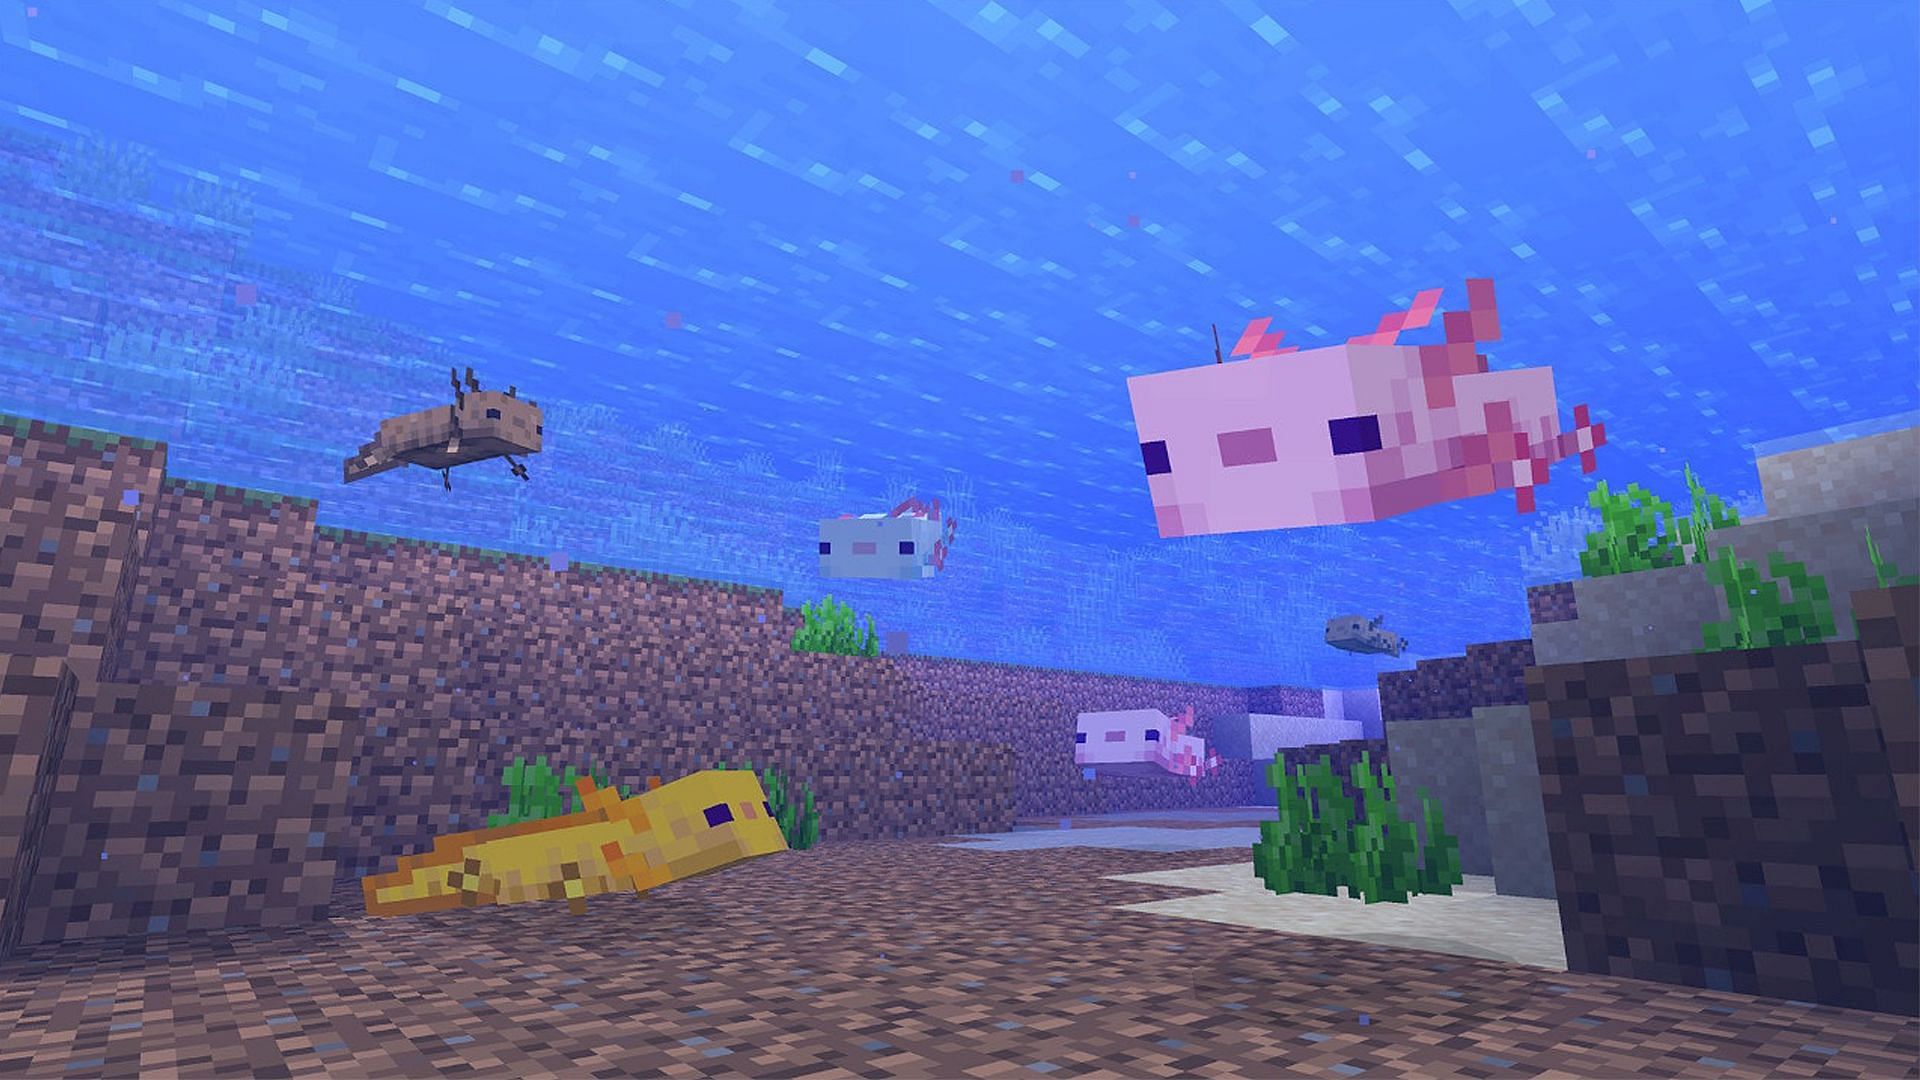 Axolotls have been one of the cutest additions to Minecraft! (Image via Minecraft)